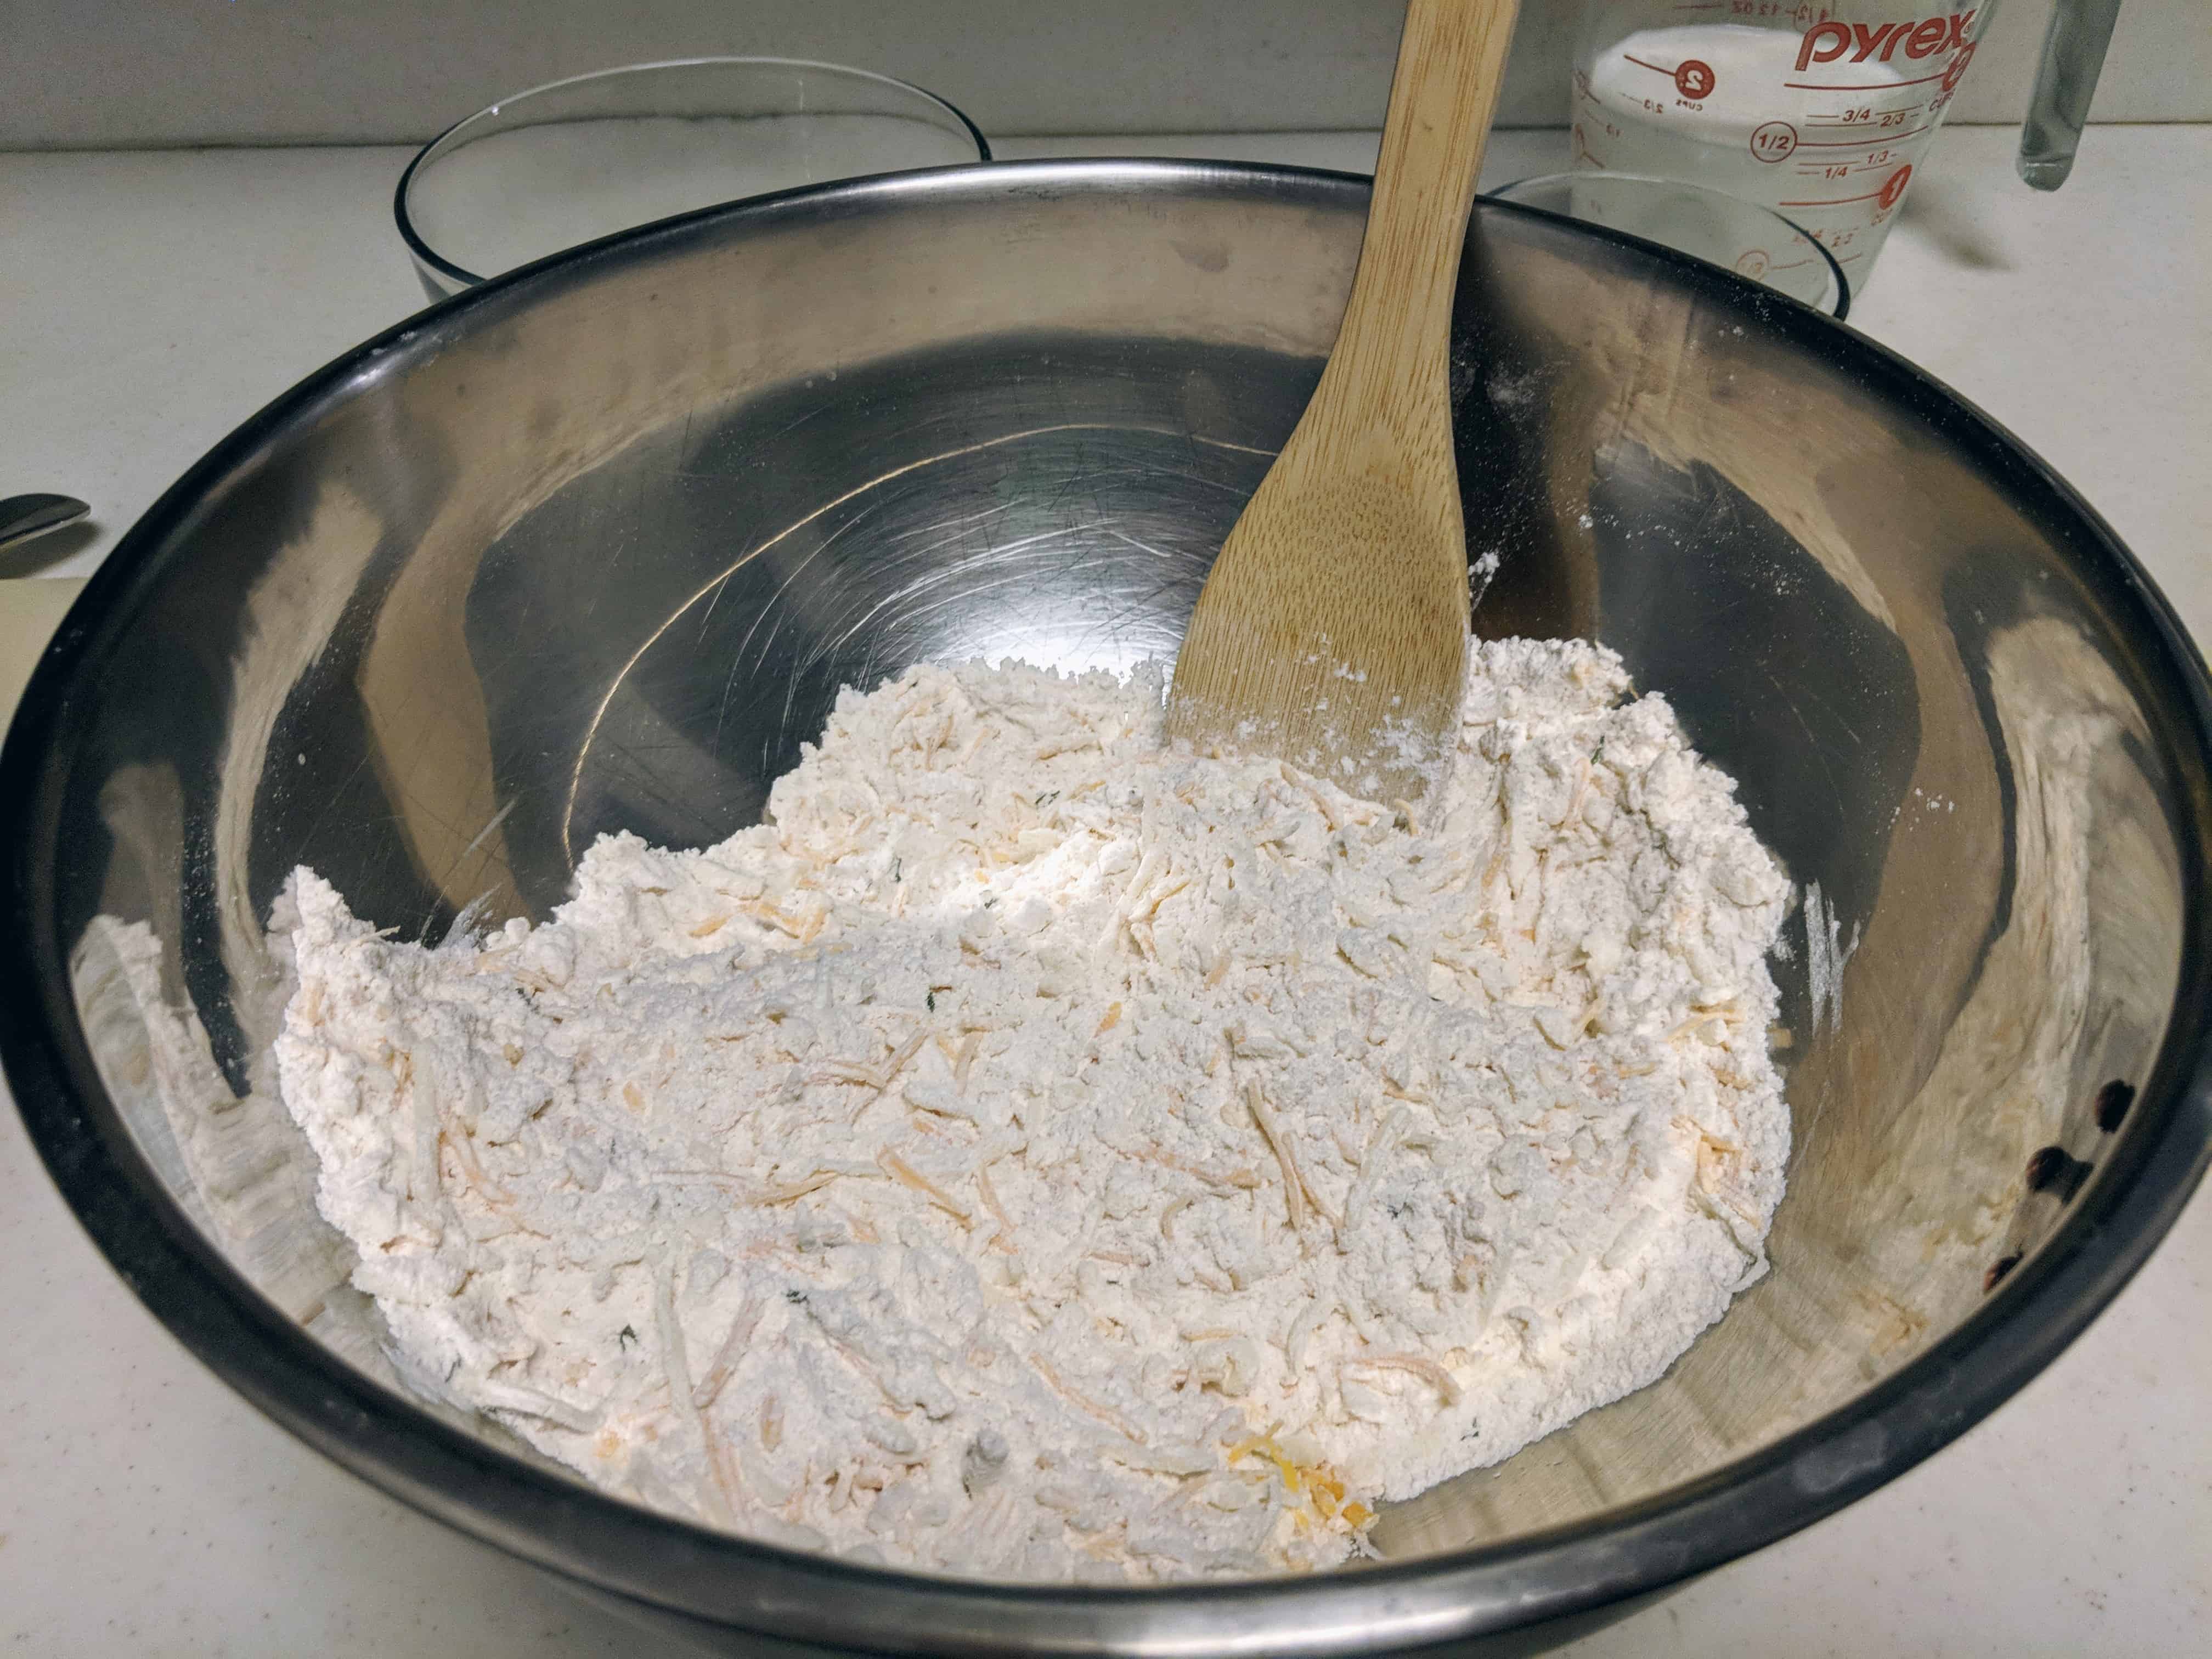 Add shredded cheese to the dry ingredients and butter. Mix well.